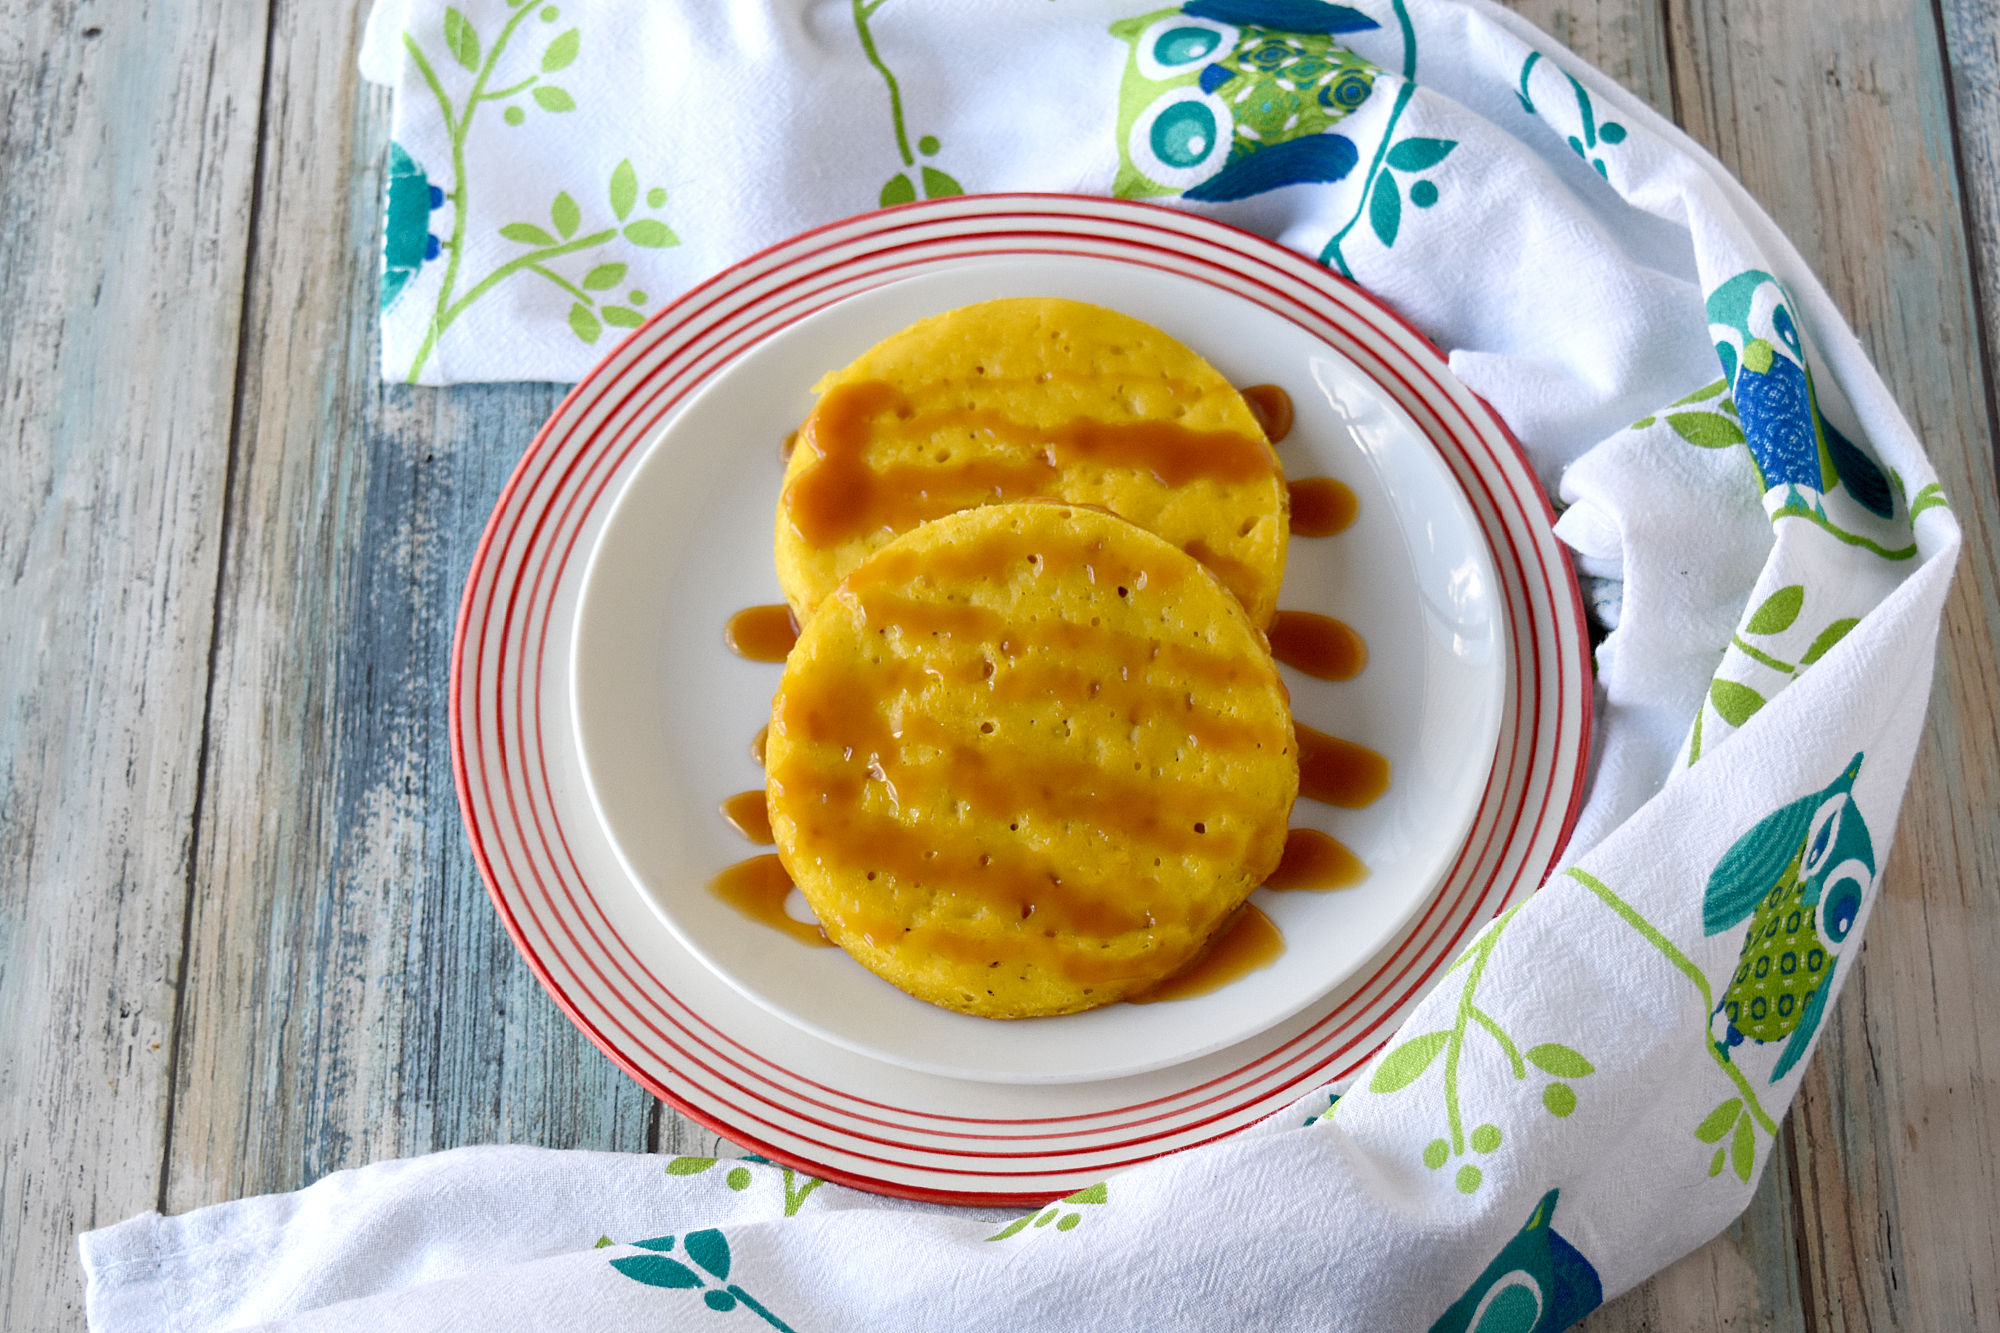 Serabi Labu Kuning aka Yellow Pumpkin Crumpets are slightly sweet and very delicious.  They're sort of like a crumpet but without the chewy texture.  These are perfect topped with caramel sauce for dessert. #PumpkinWeek